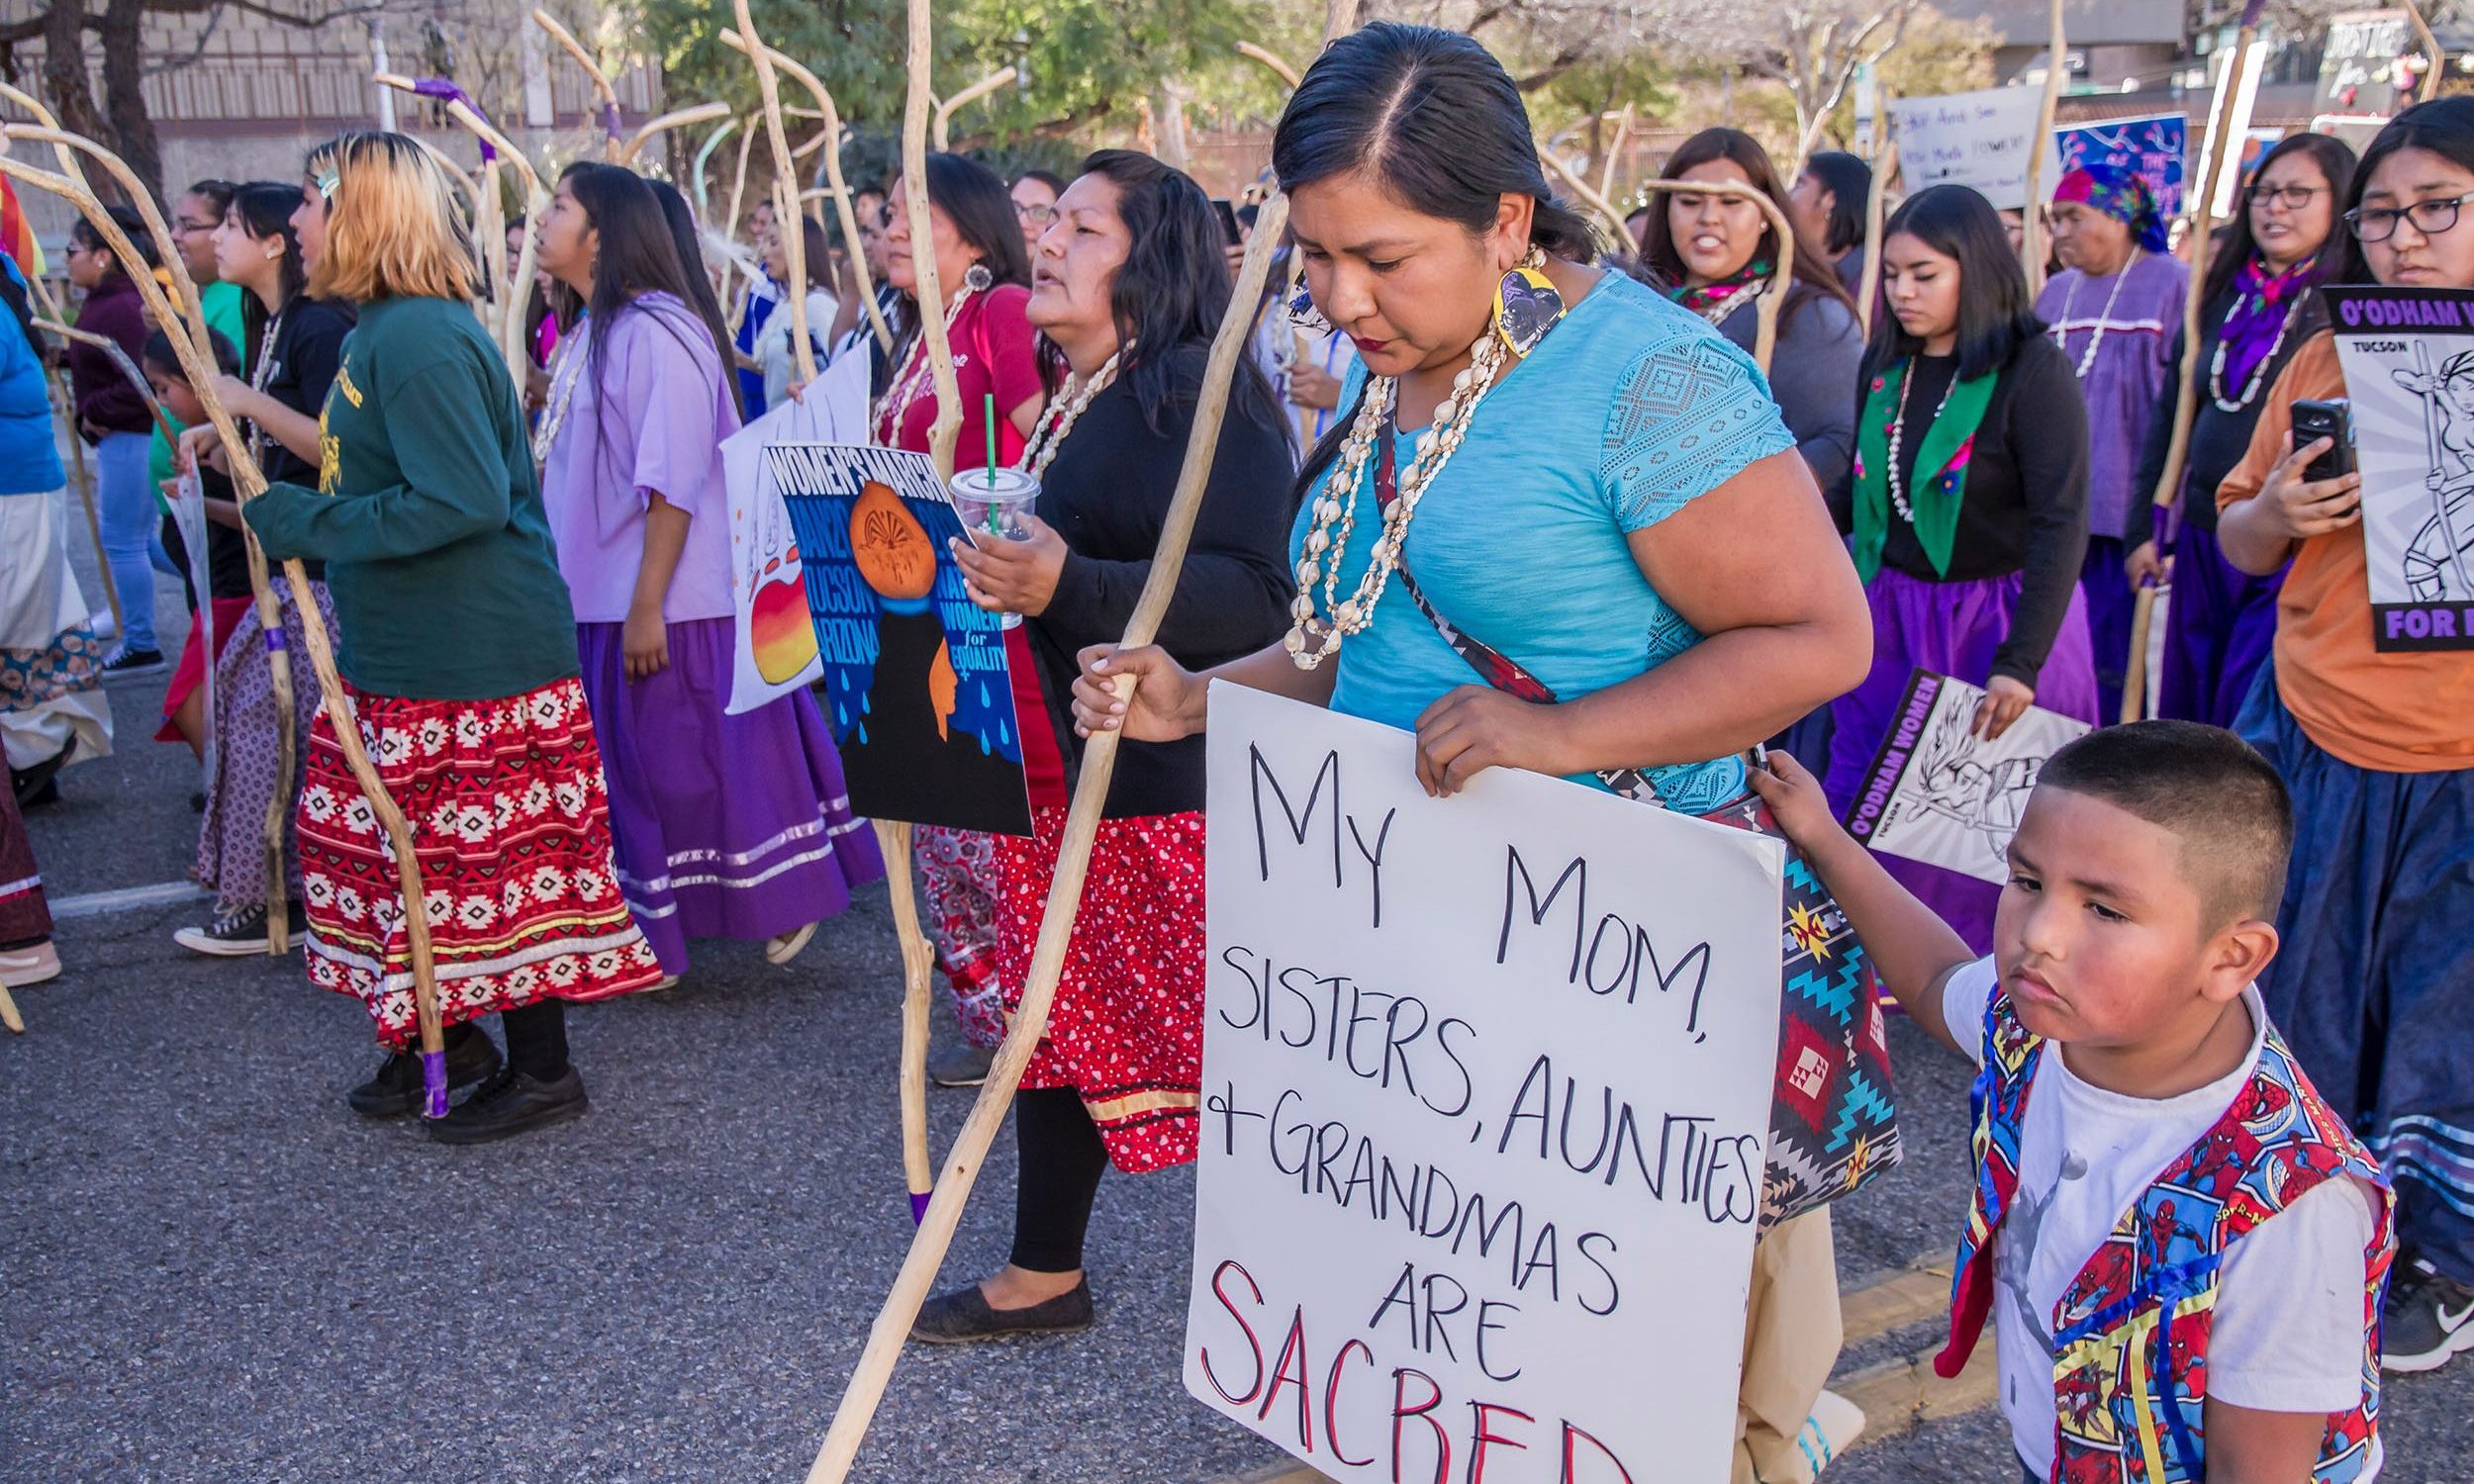 woman in protest holding sign that reads 'My mom, sisters, aunties + grandmas are sacred' (link to file)